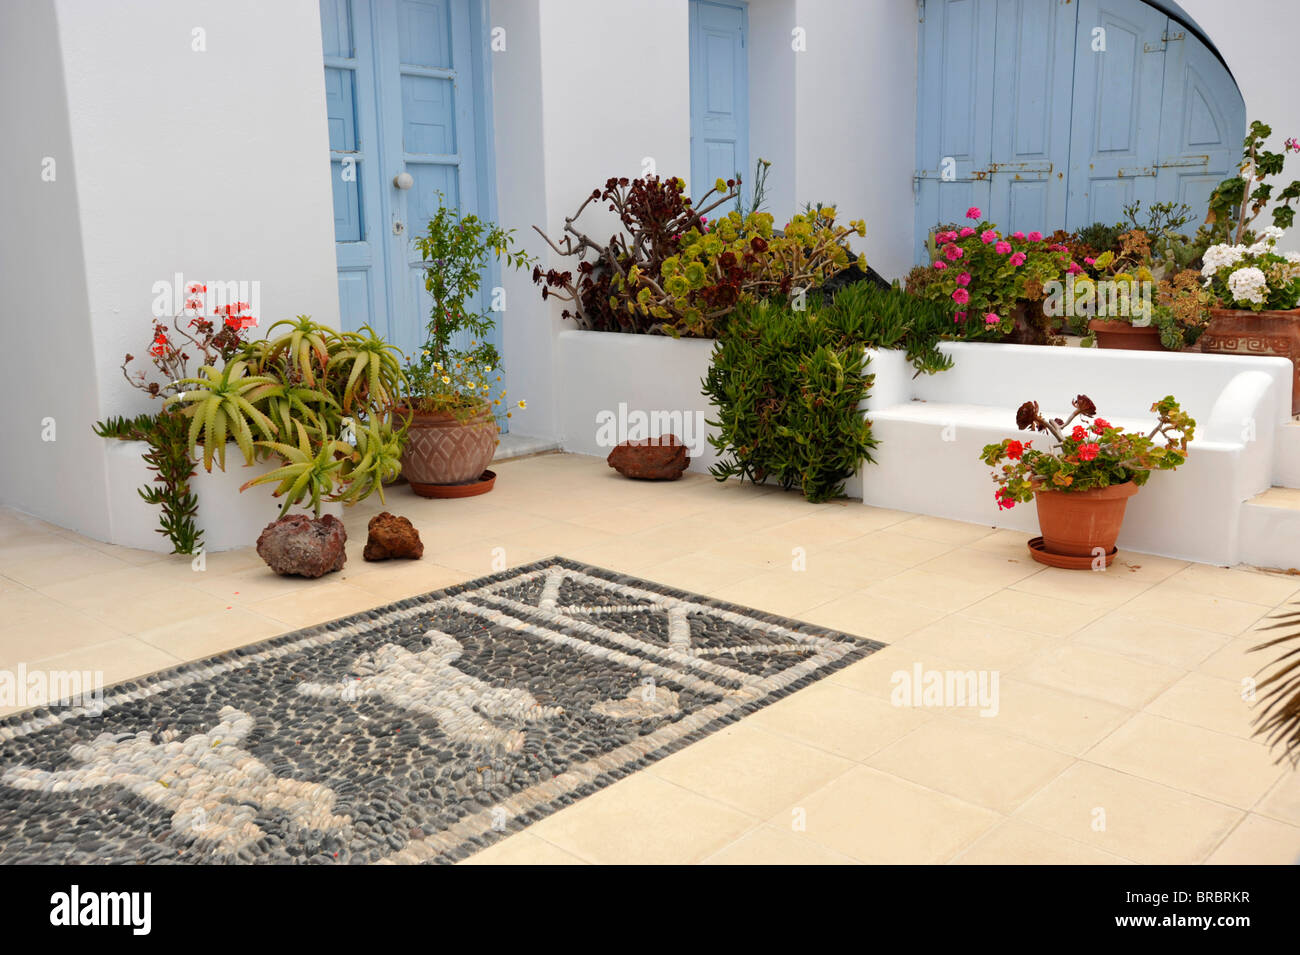 House fronts and courtyards on the Greek Island of Santorini Stock Photo